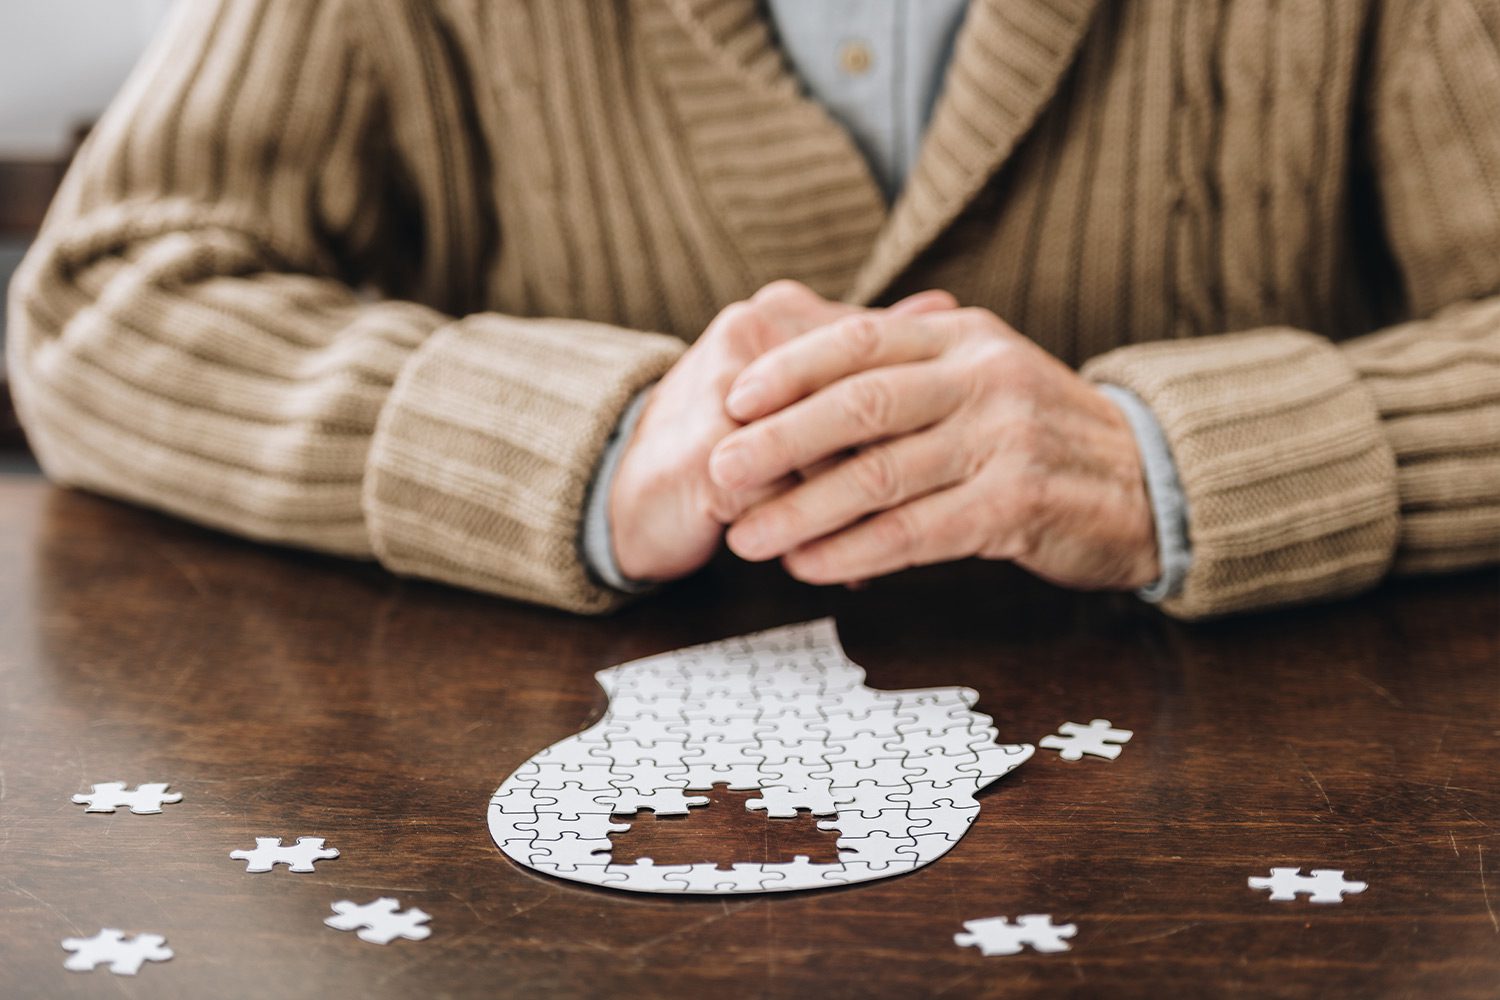 senior suffering from dementia solving head shaped puzzle on wooden table